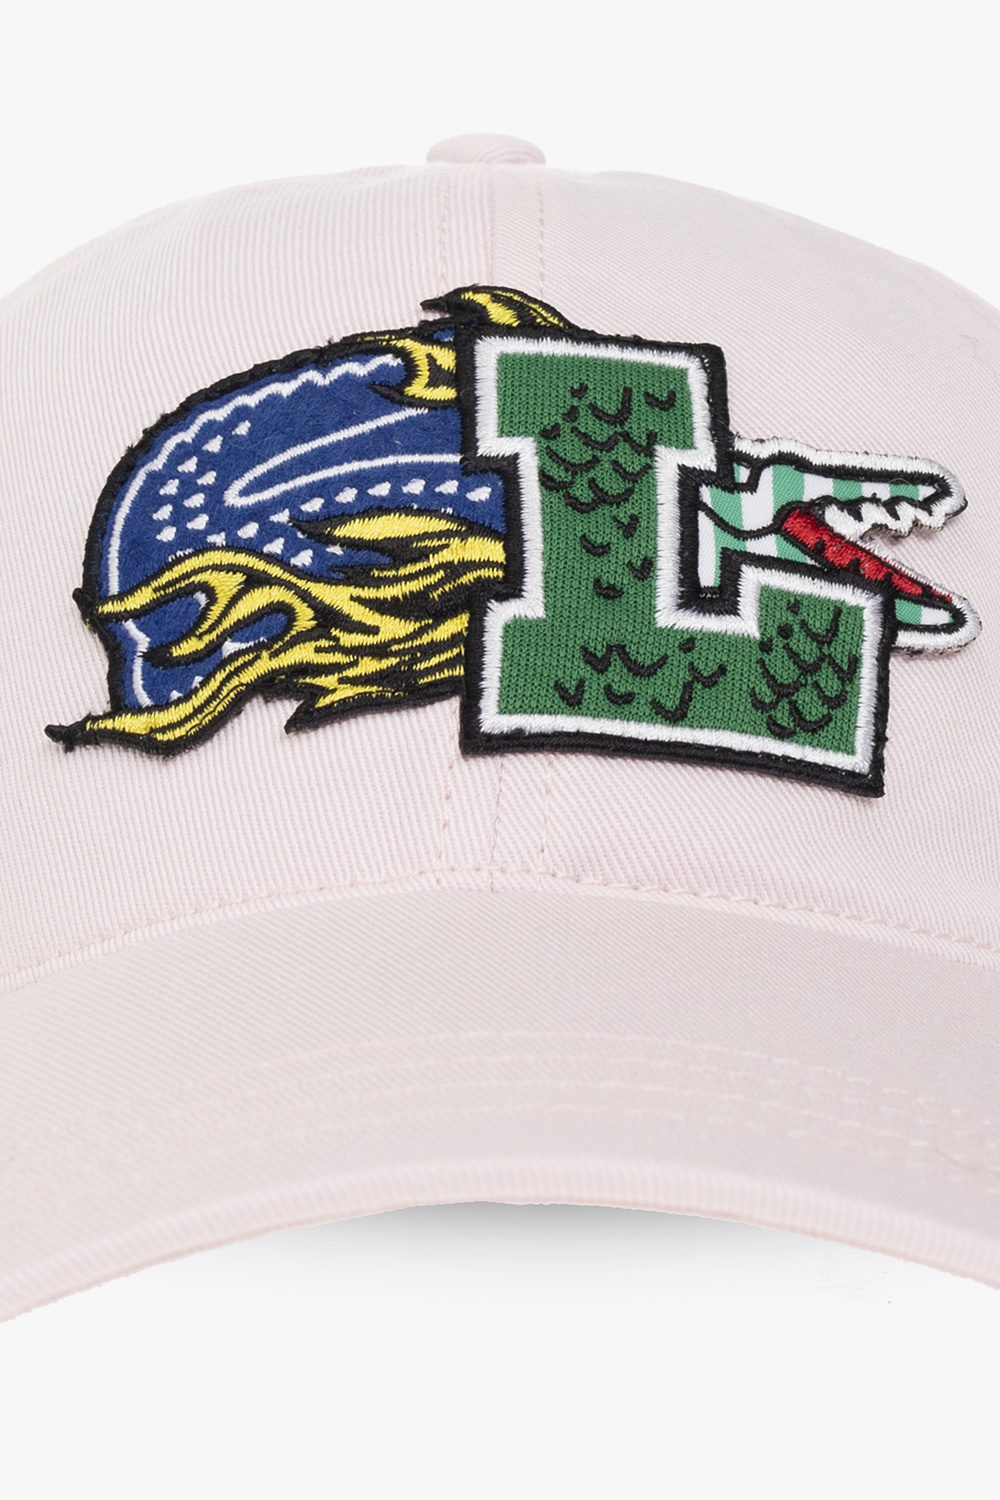 Pink logo with Lacoste atmos Serve and with Cap - collection Japan Serve new collaborated on Lacoste a IetpShops -